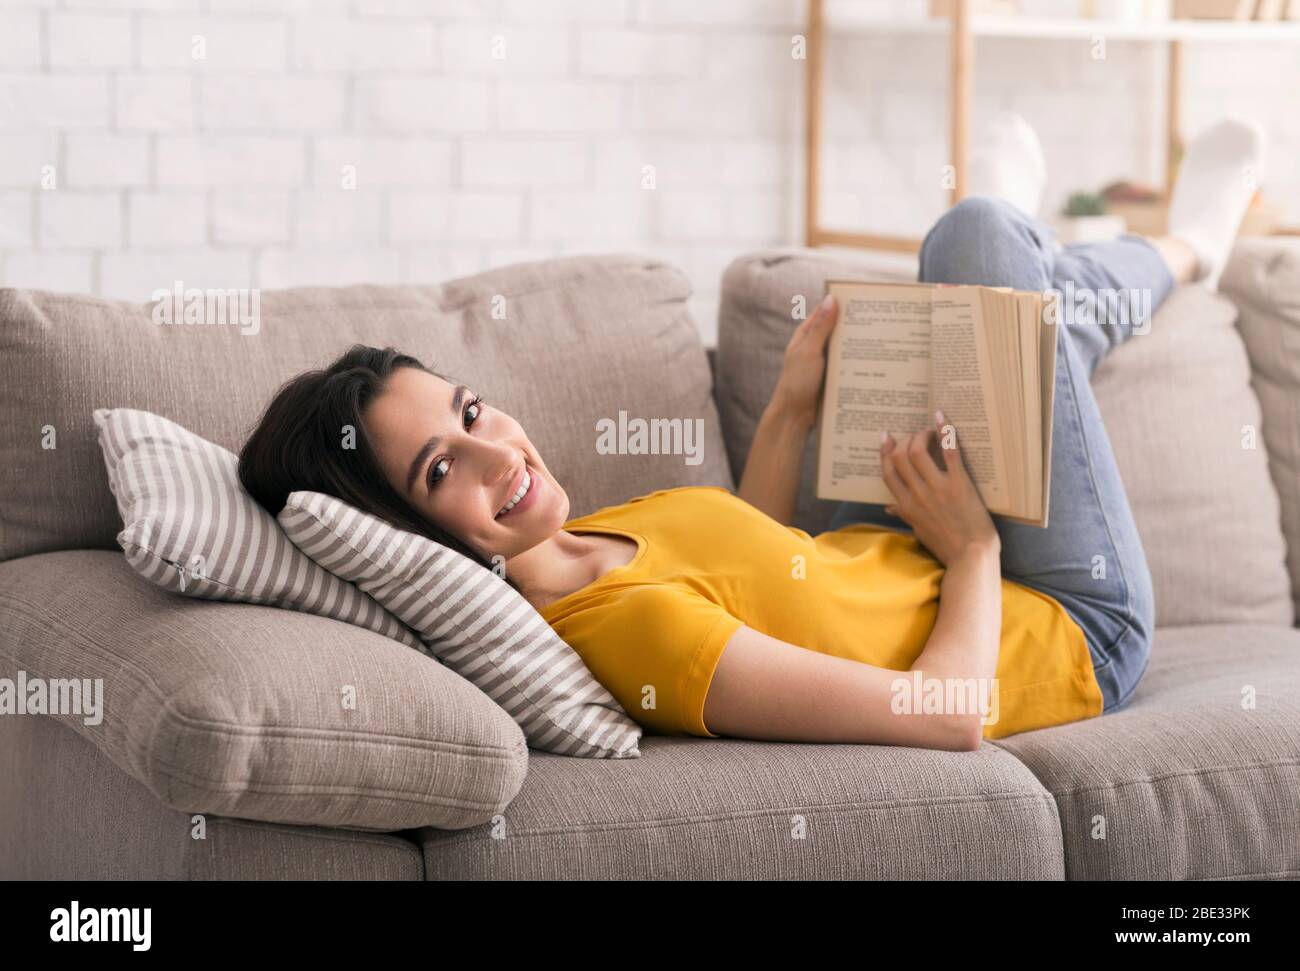 Lockdown leisure activities. Young girl reading book while lying on sofa at home Stock Photo